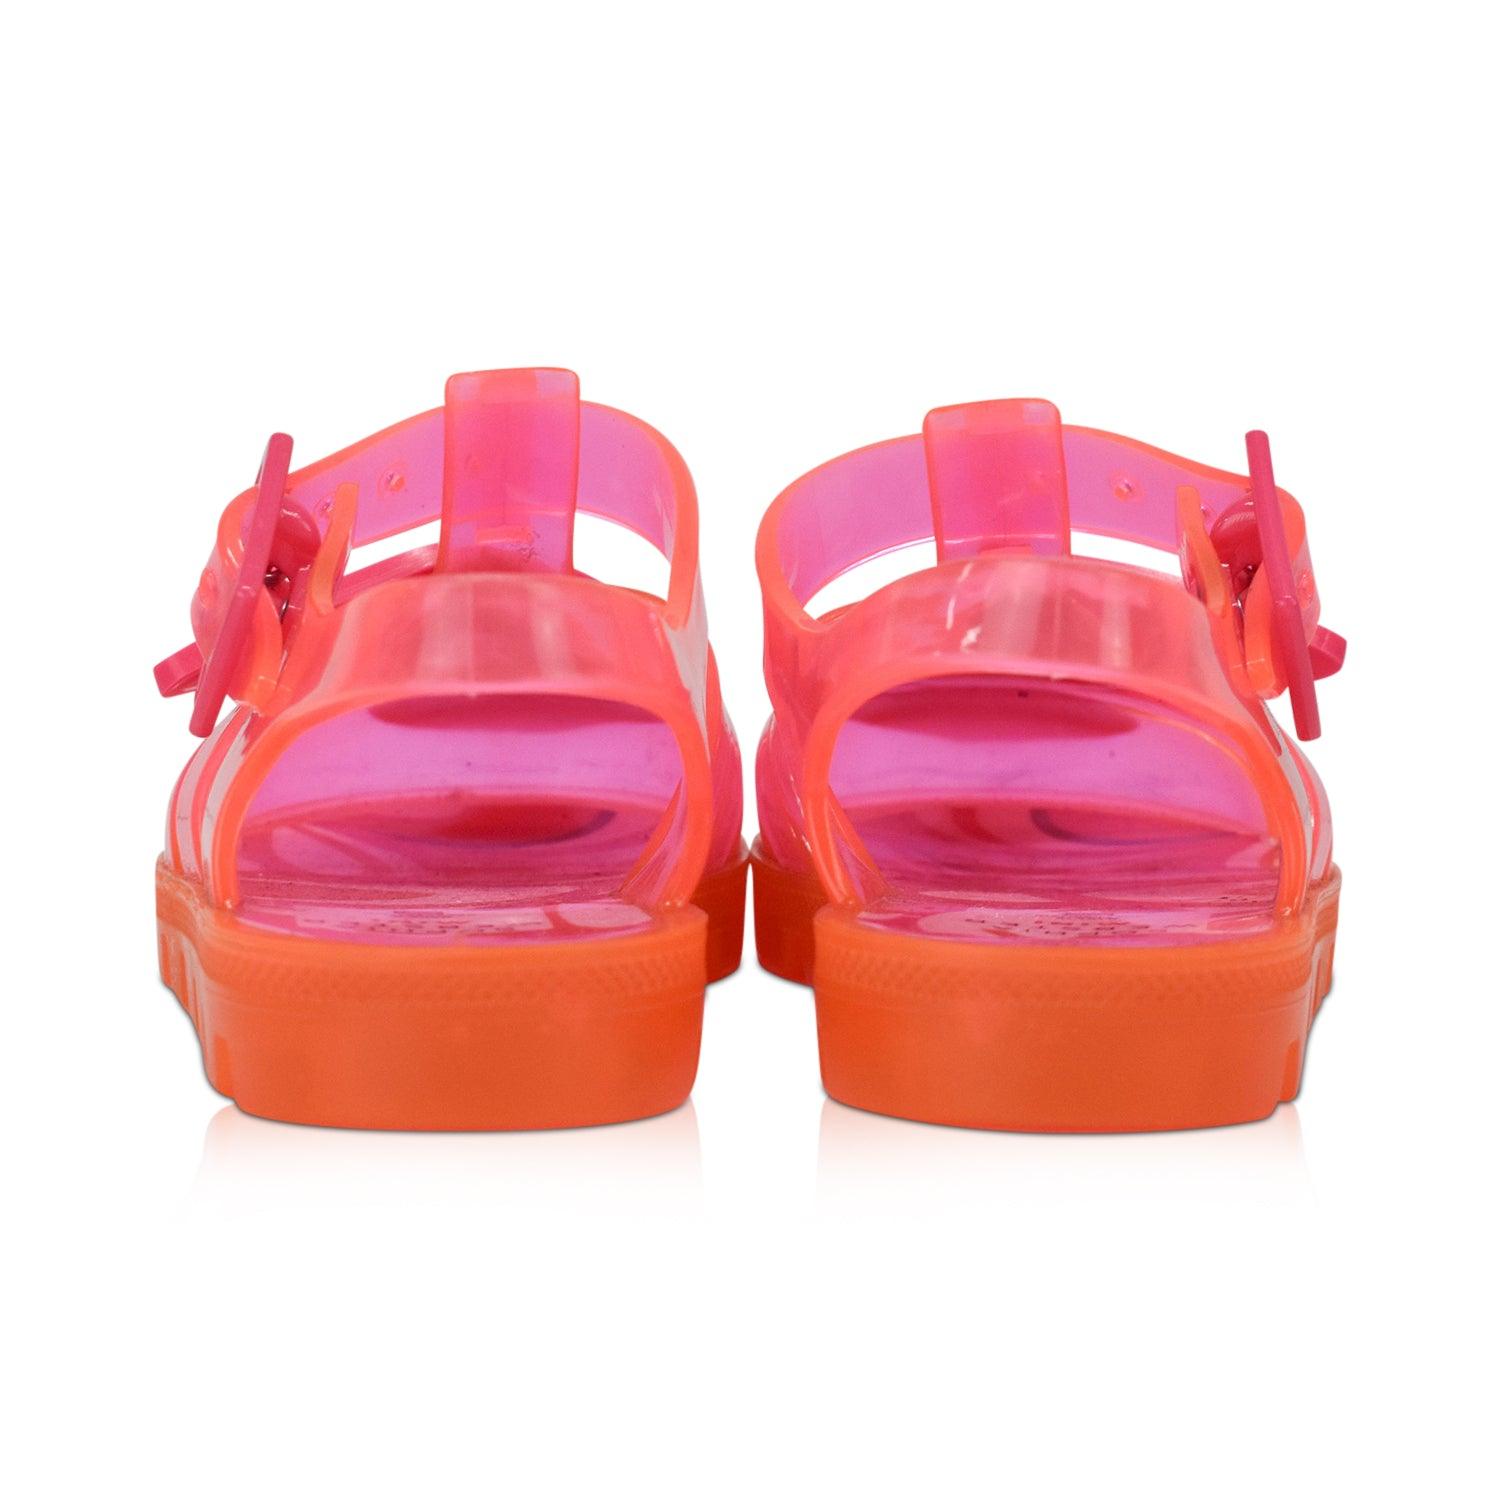 Sophia Webster Sandals - Baby 5 - Fashionably Yours